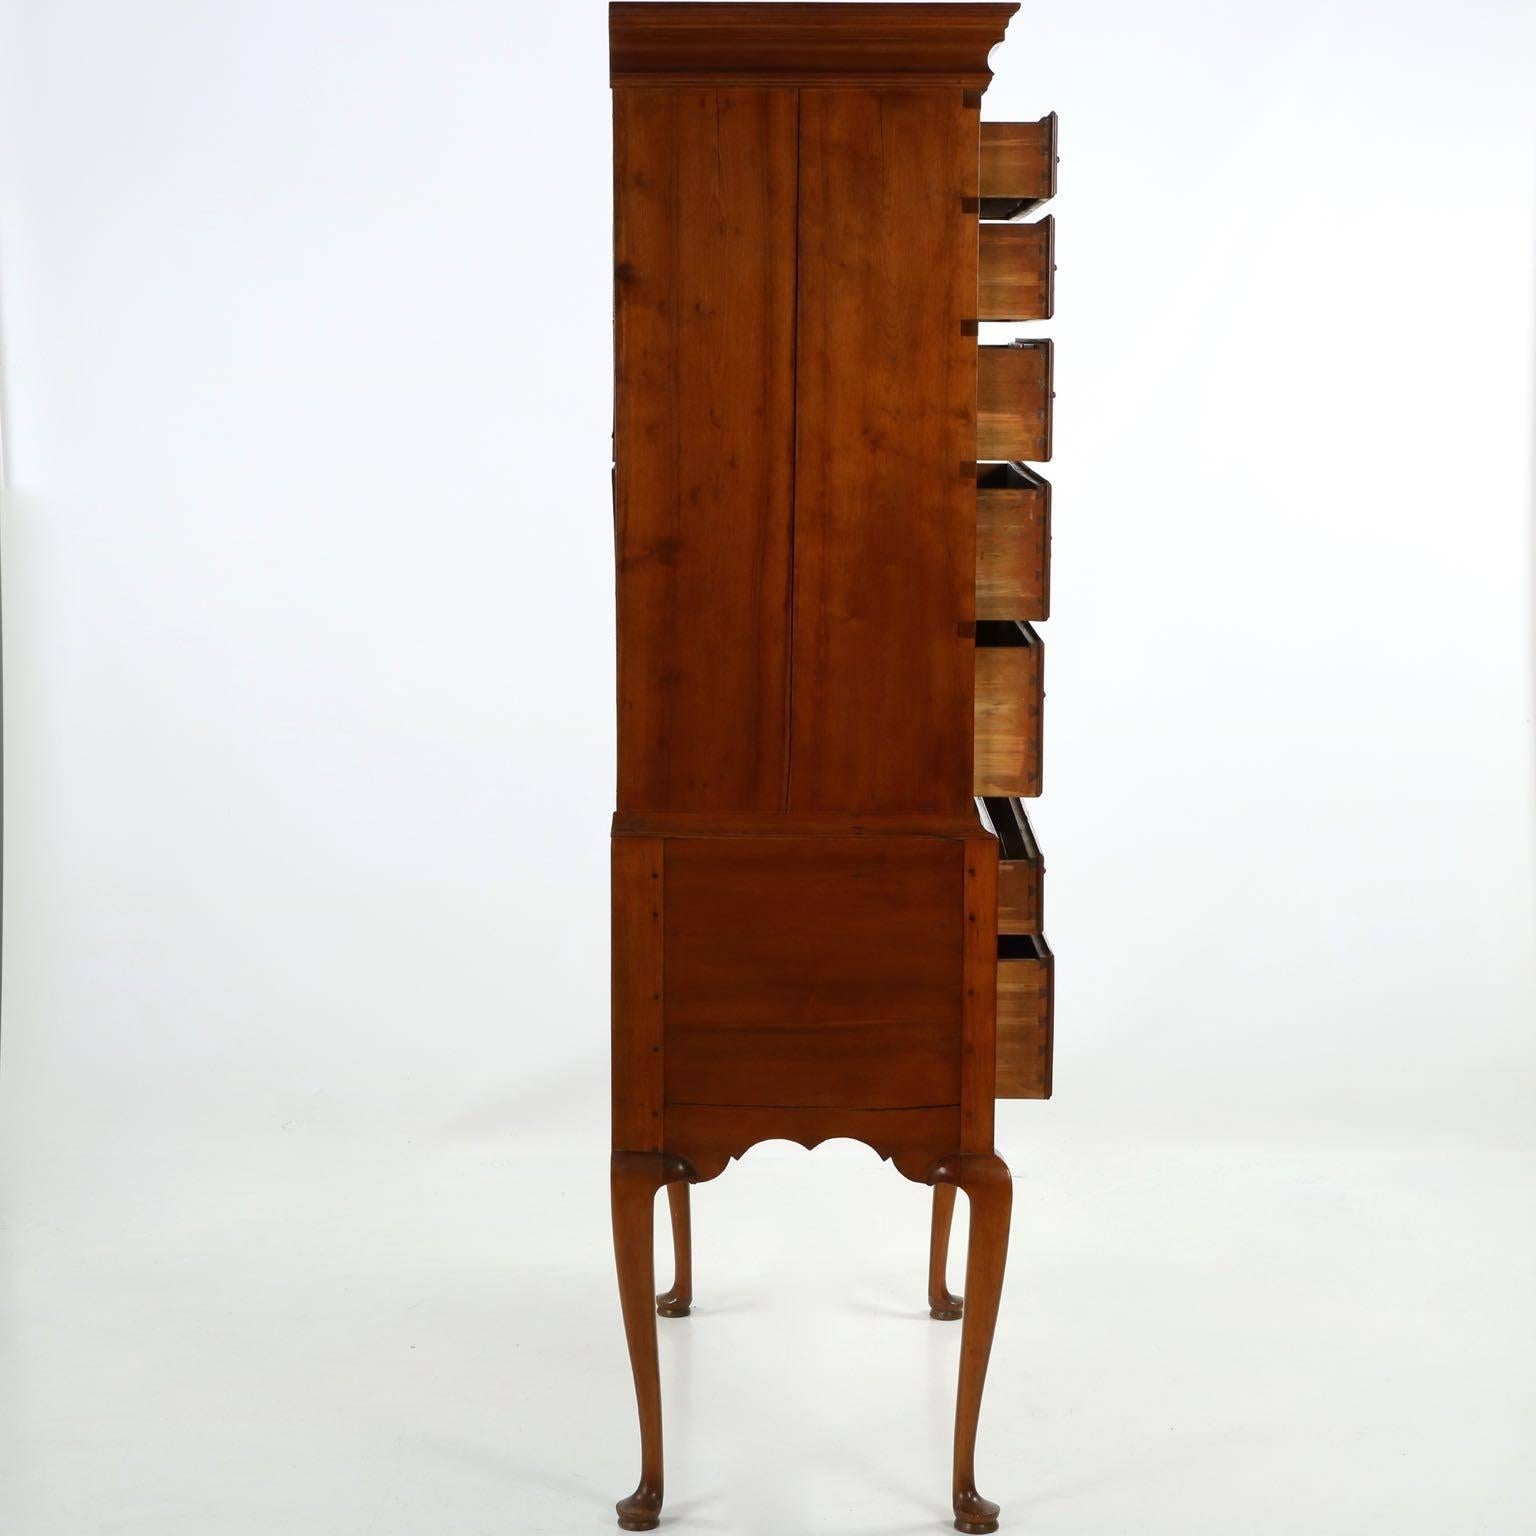 18th Century Fine American Queen Anne Cherry Highboy Chest of Drawers, New England